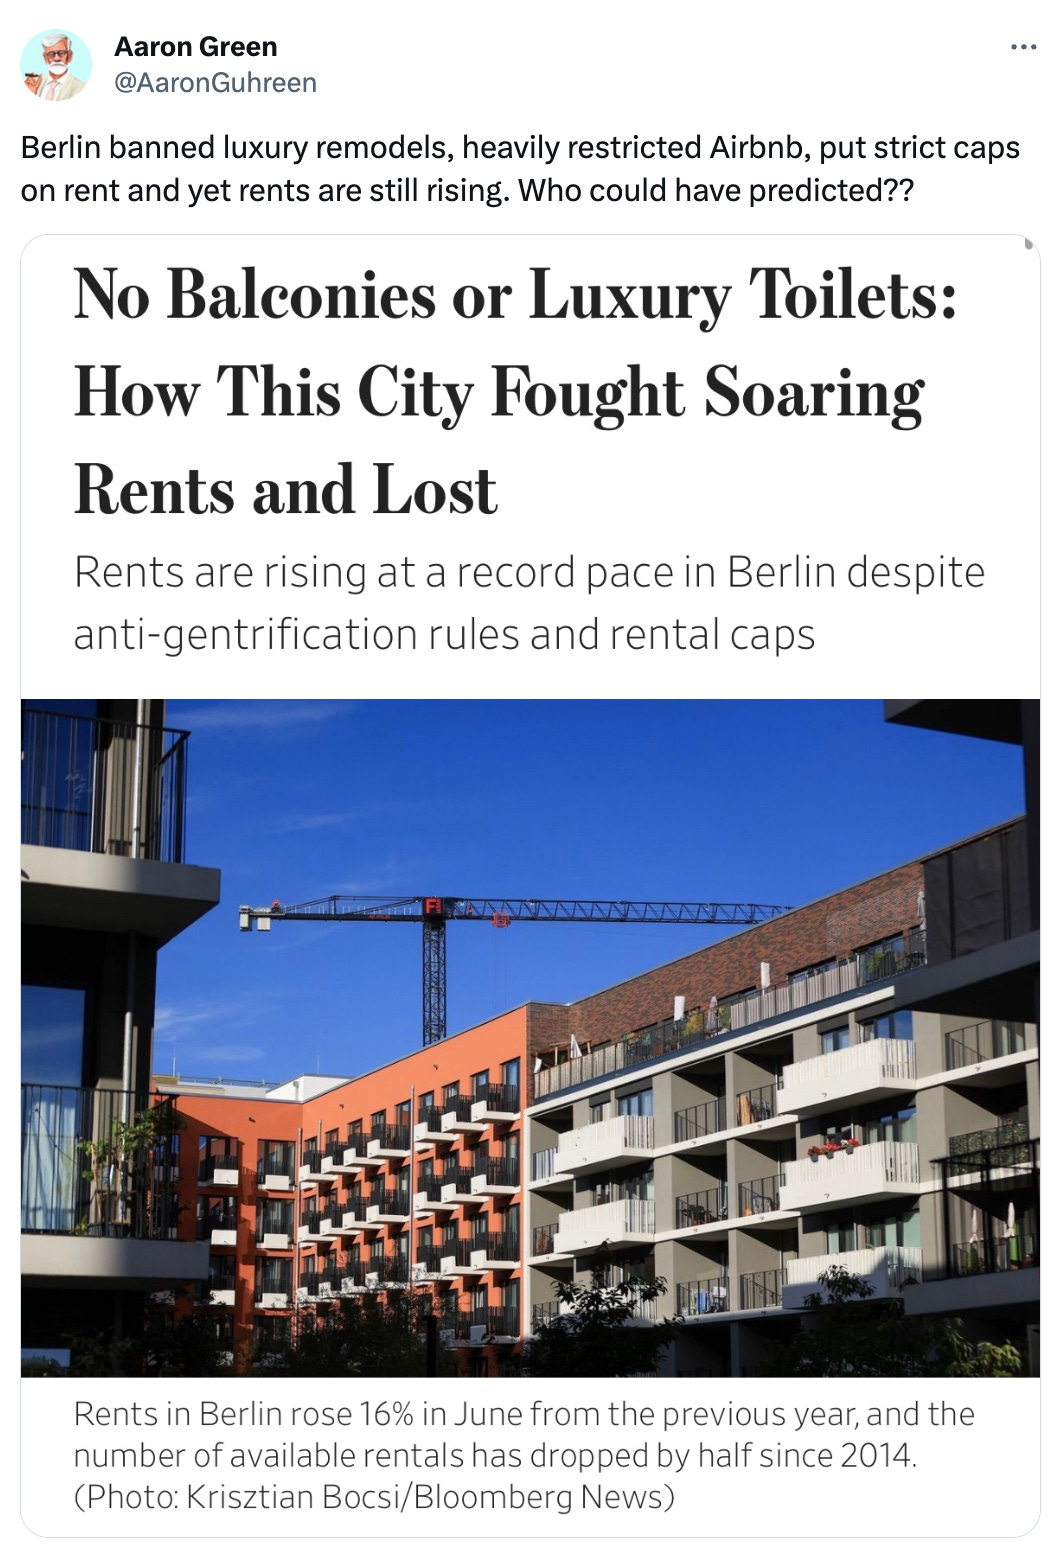  Aaron Green @AaronGuhreen Berlin banned luxury remodels, heavily restricted Airbnb, put strict caps on rent and yet rents are still rising. Who could have predicted??